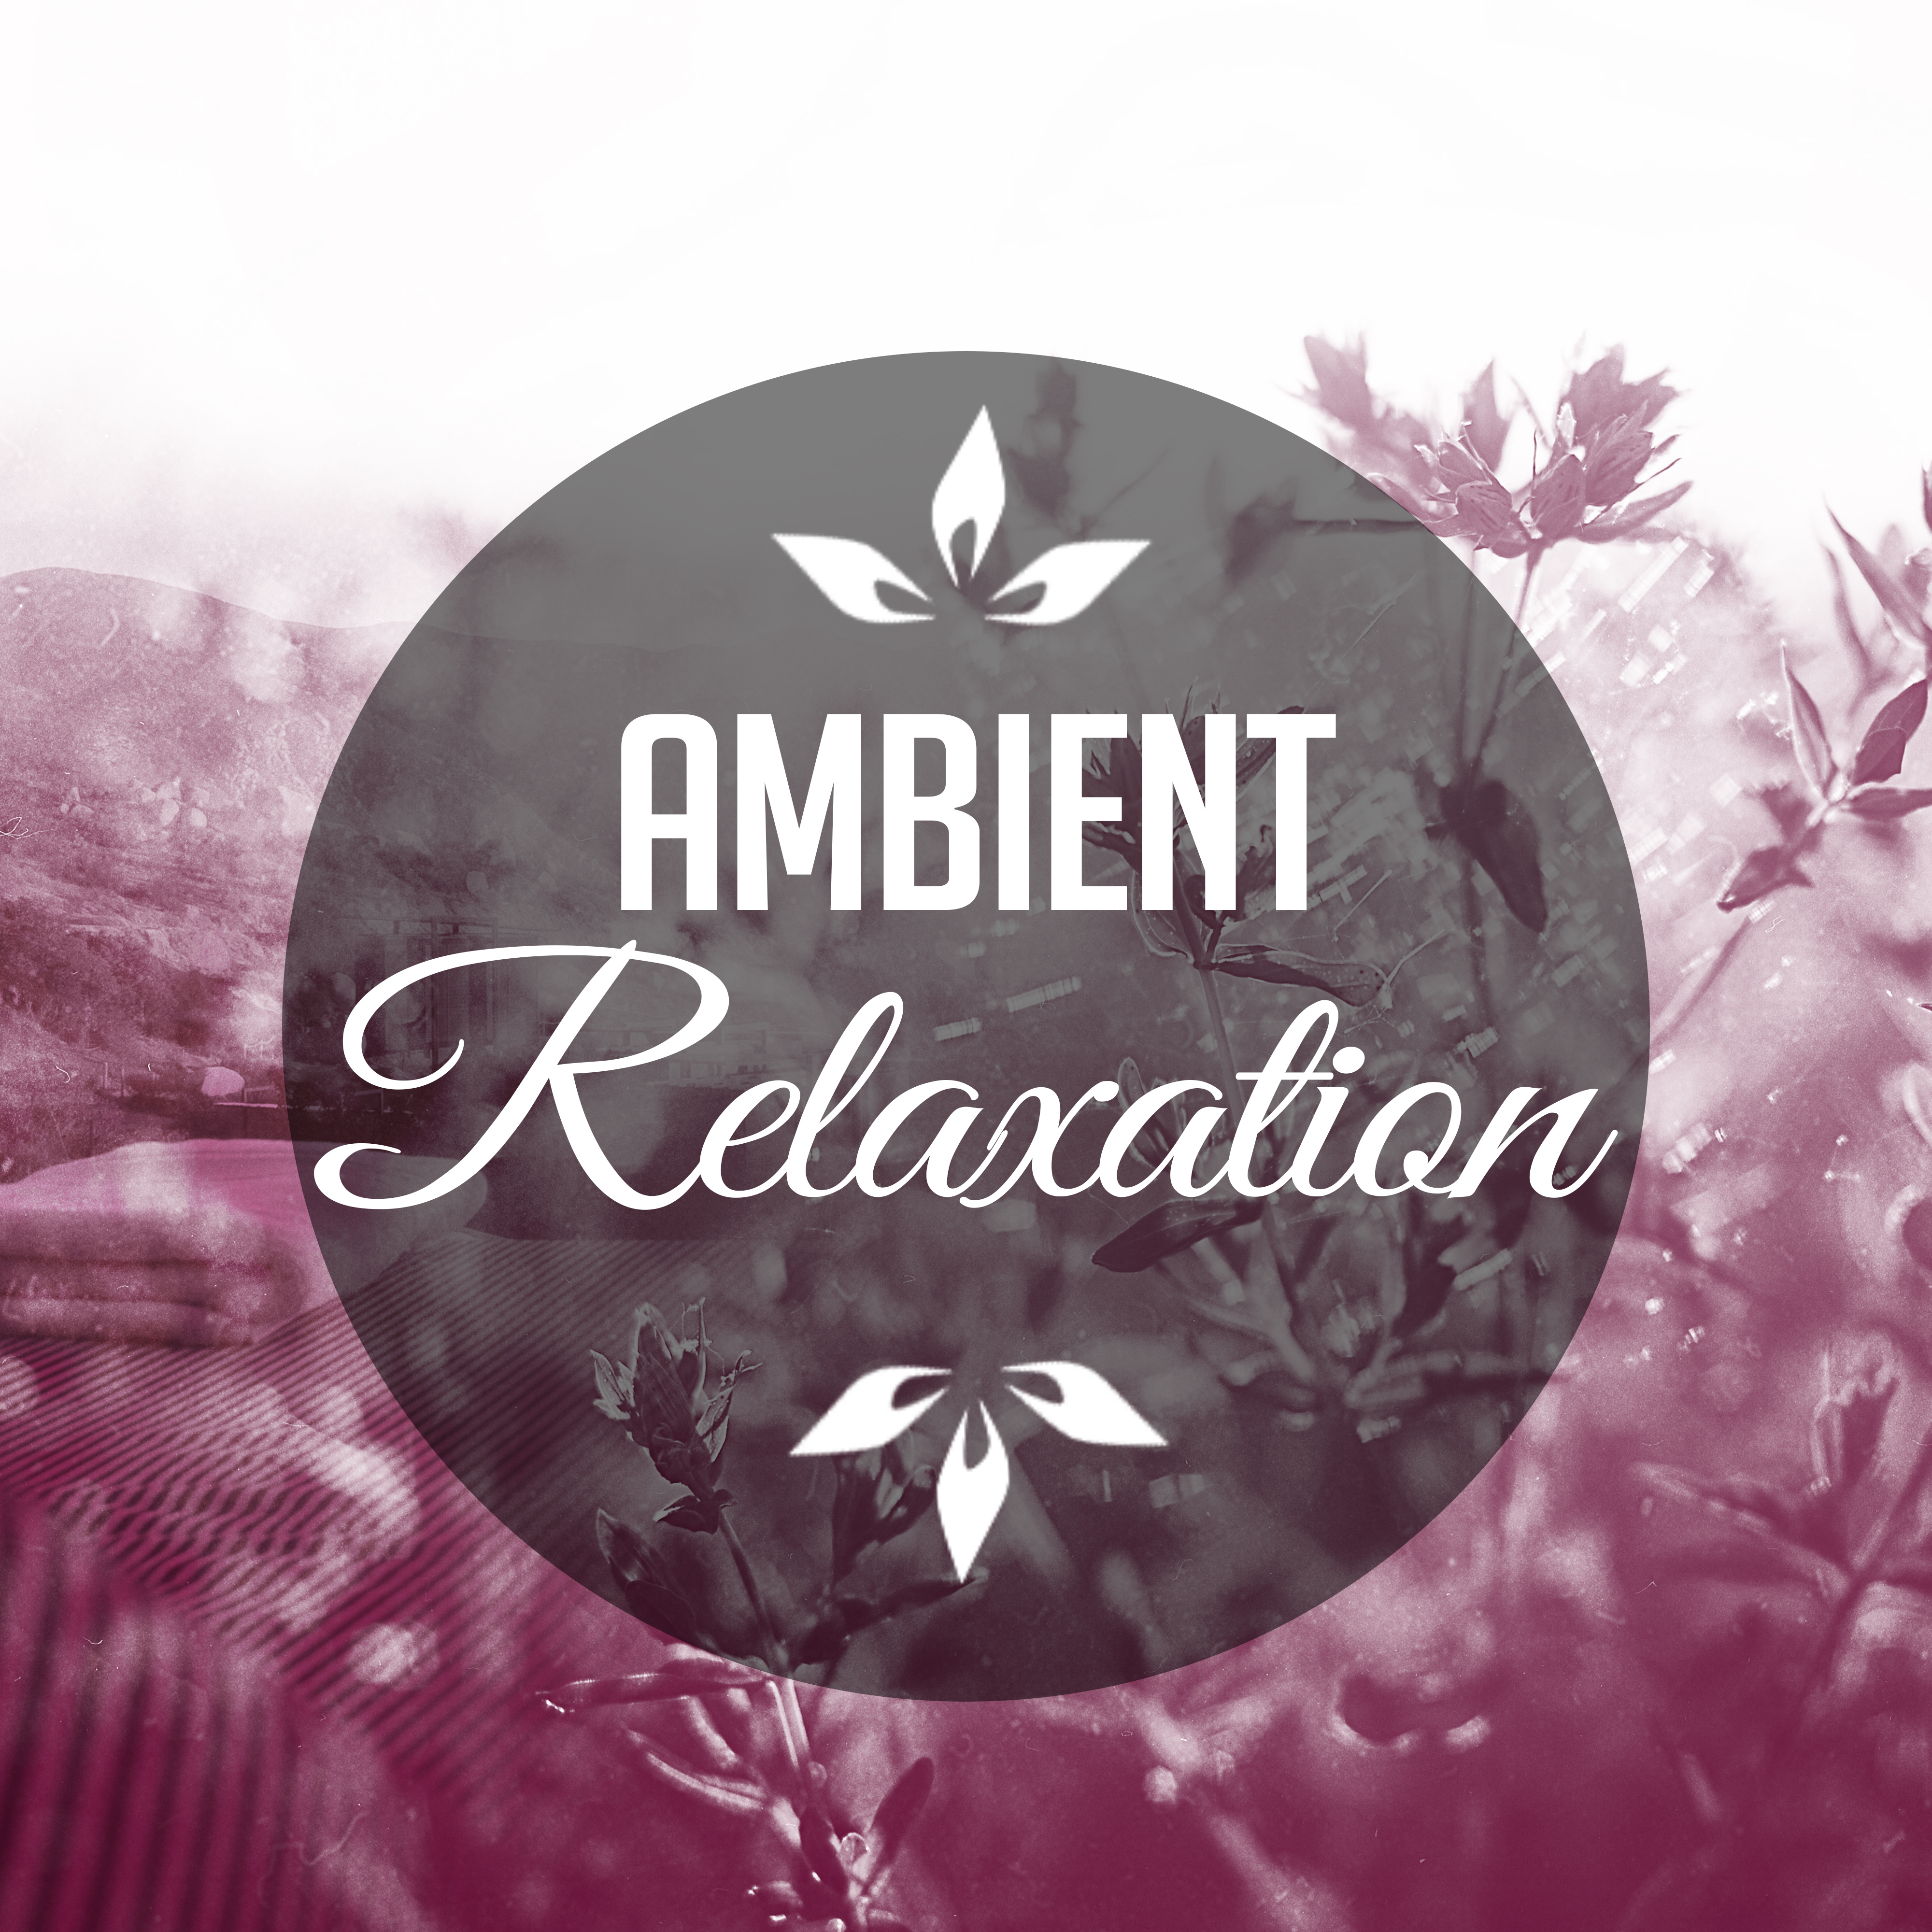 Ambient Relaxation – Relaxing Music for Manage Stress, Sounds of Nature, Relaxation Spa Music, Rest